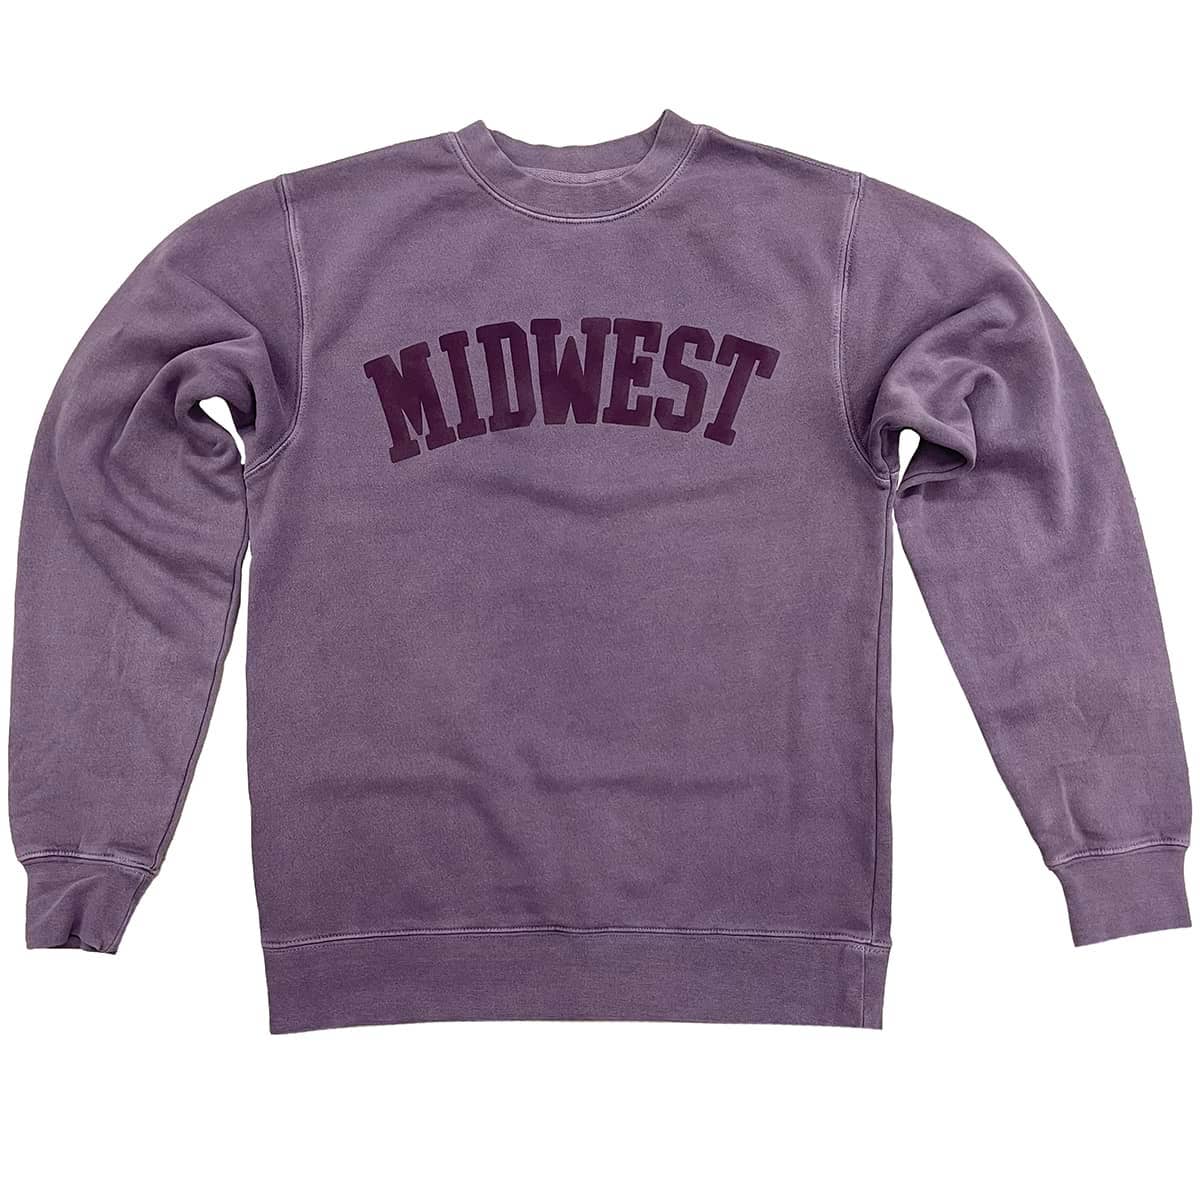 Purchase Wholesale midwest sweatshirt. Free Returns & Net 60 Terms on Faire